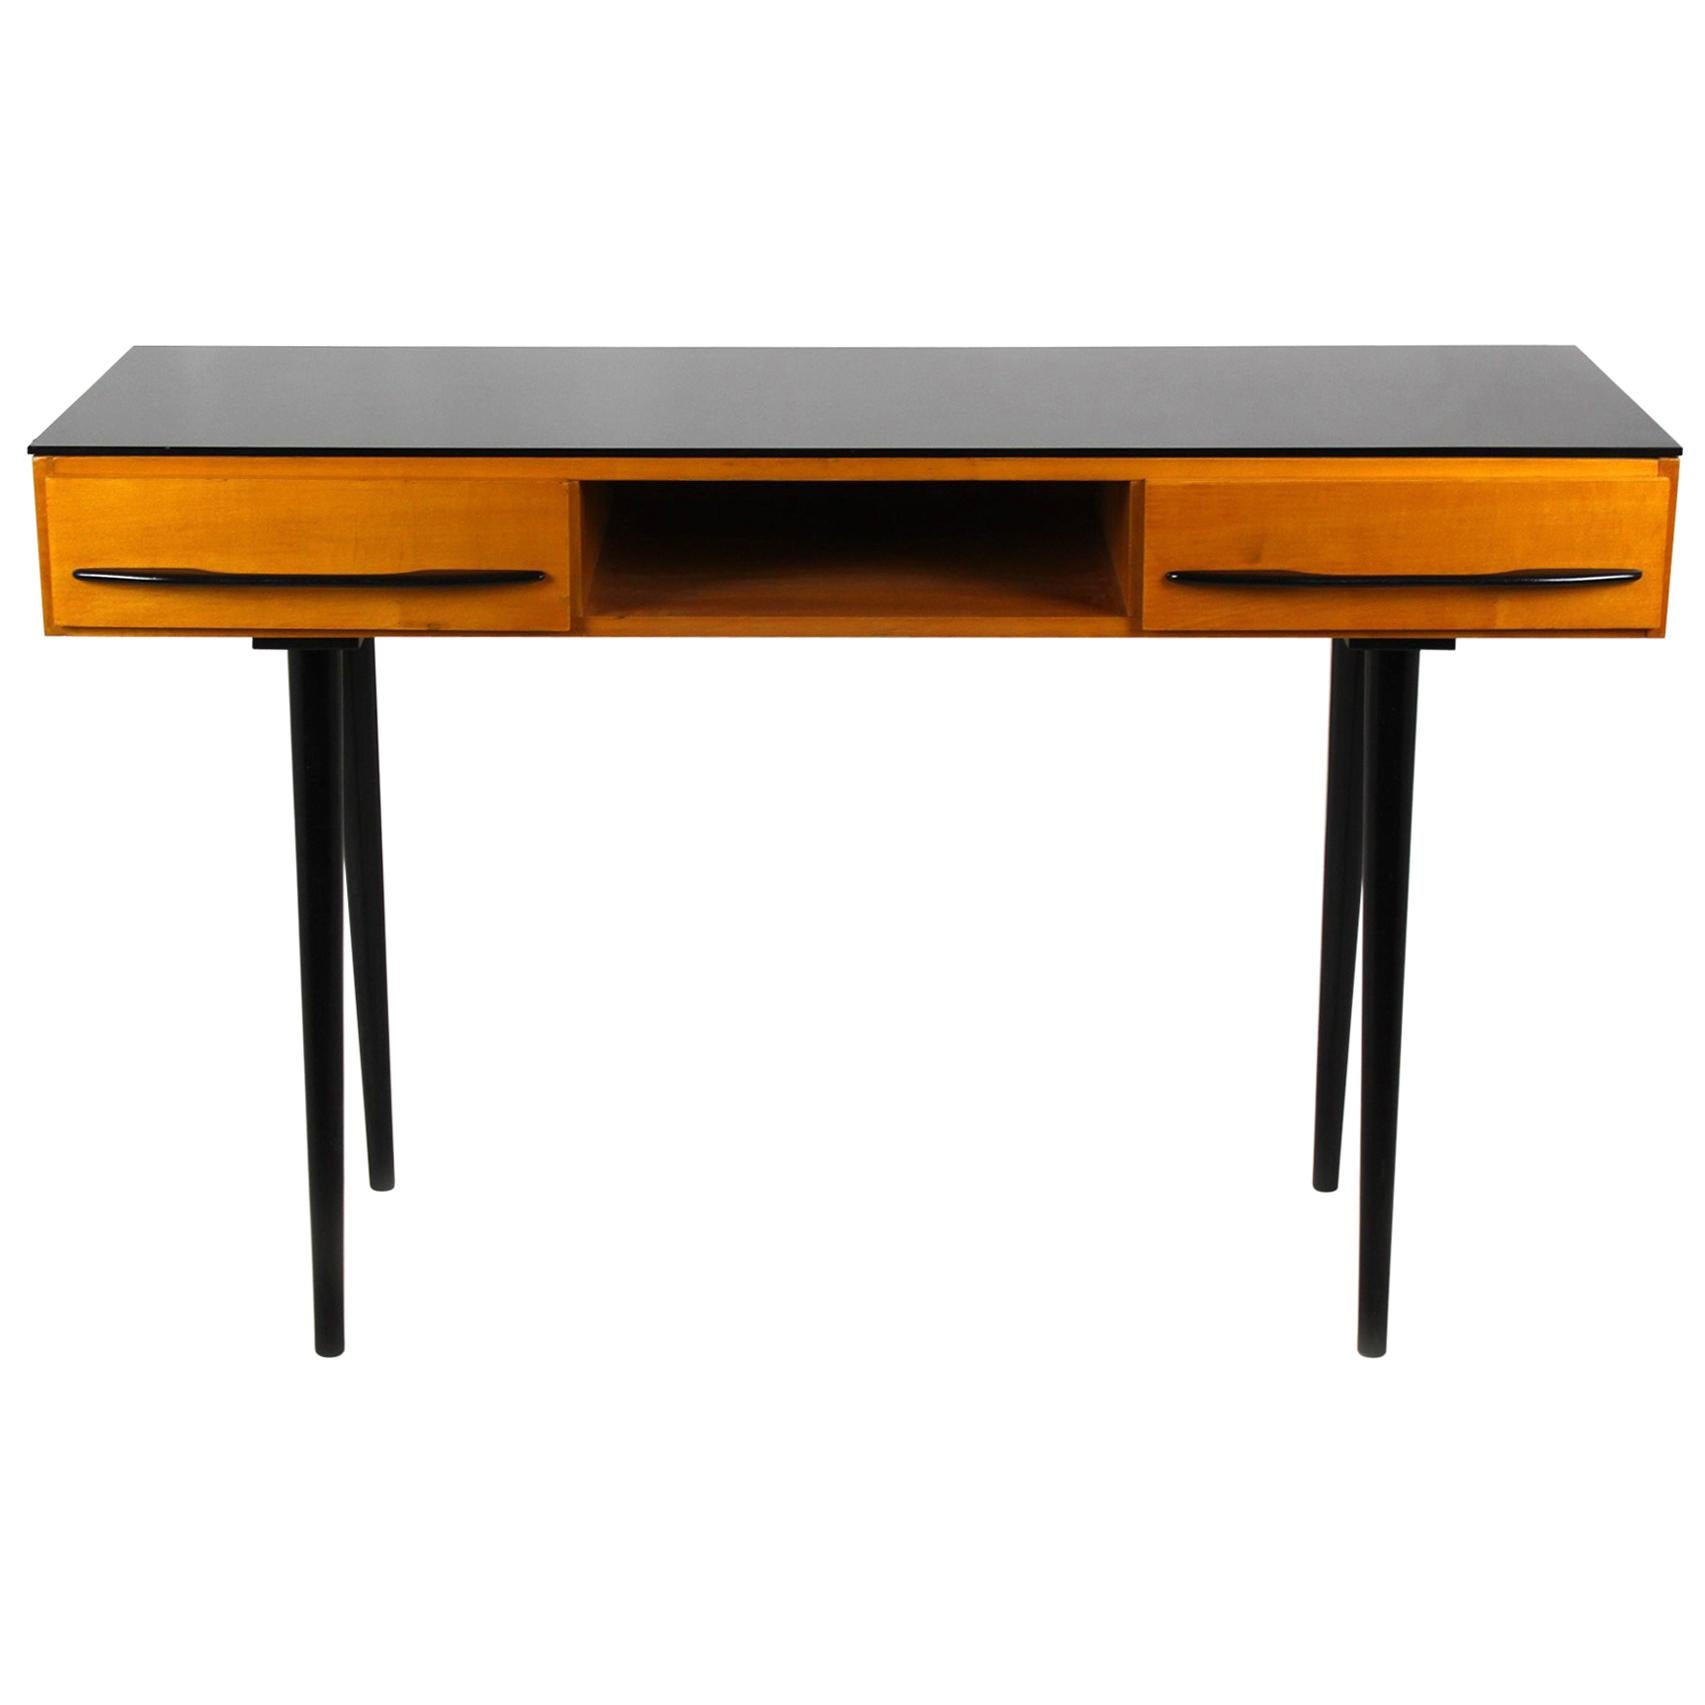 Midcentury Desk or Console Table by Mojmír Požár for UP Bučovice, 1960s